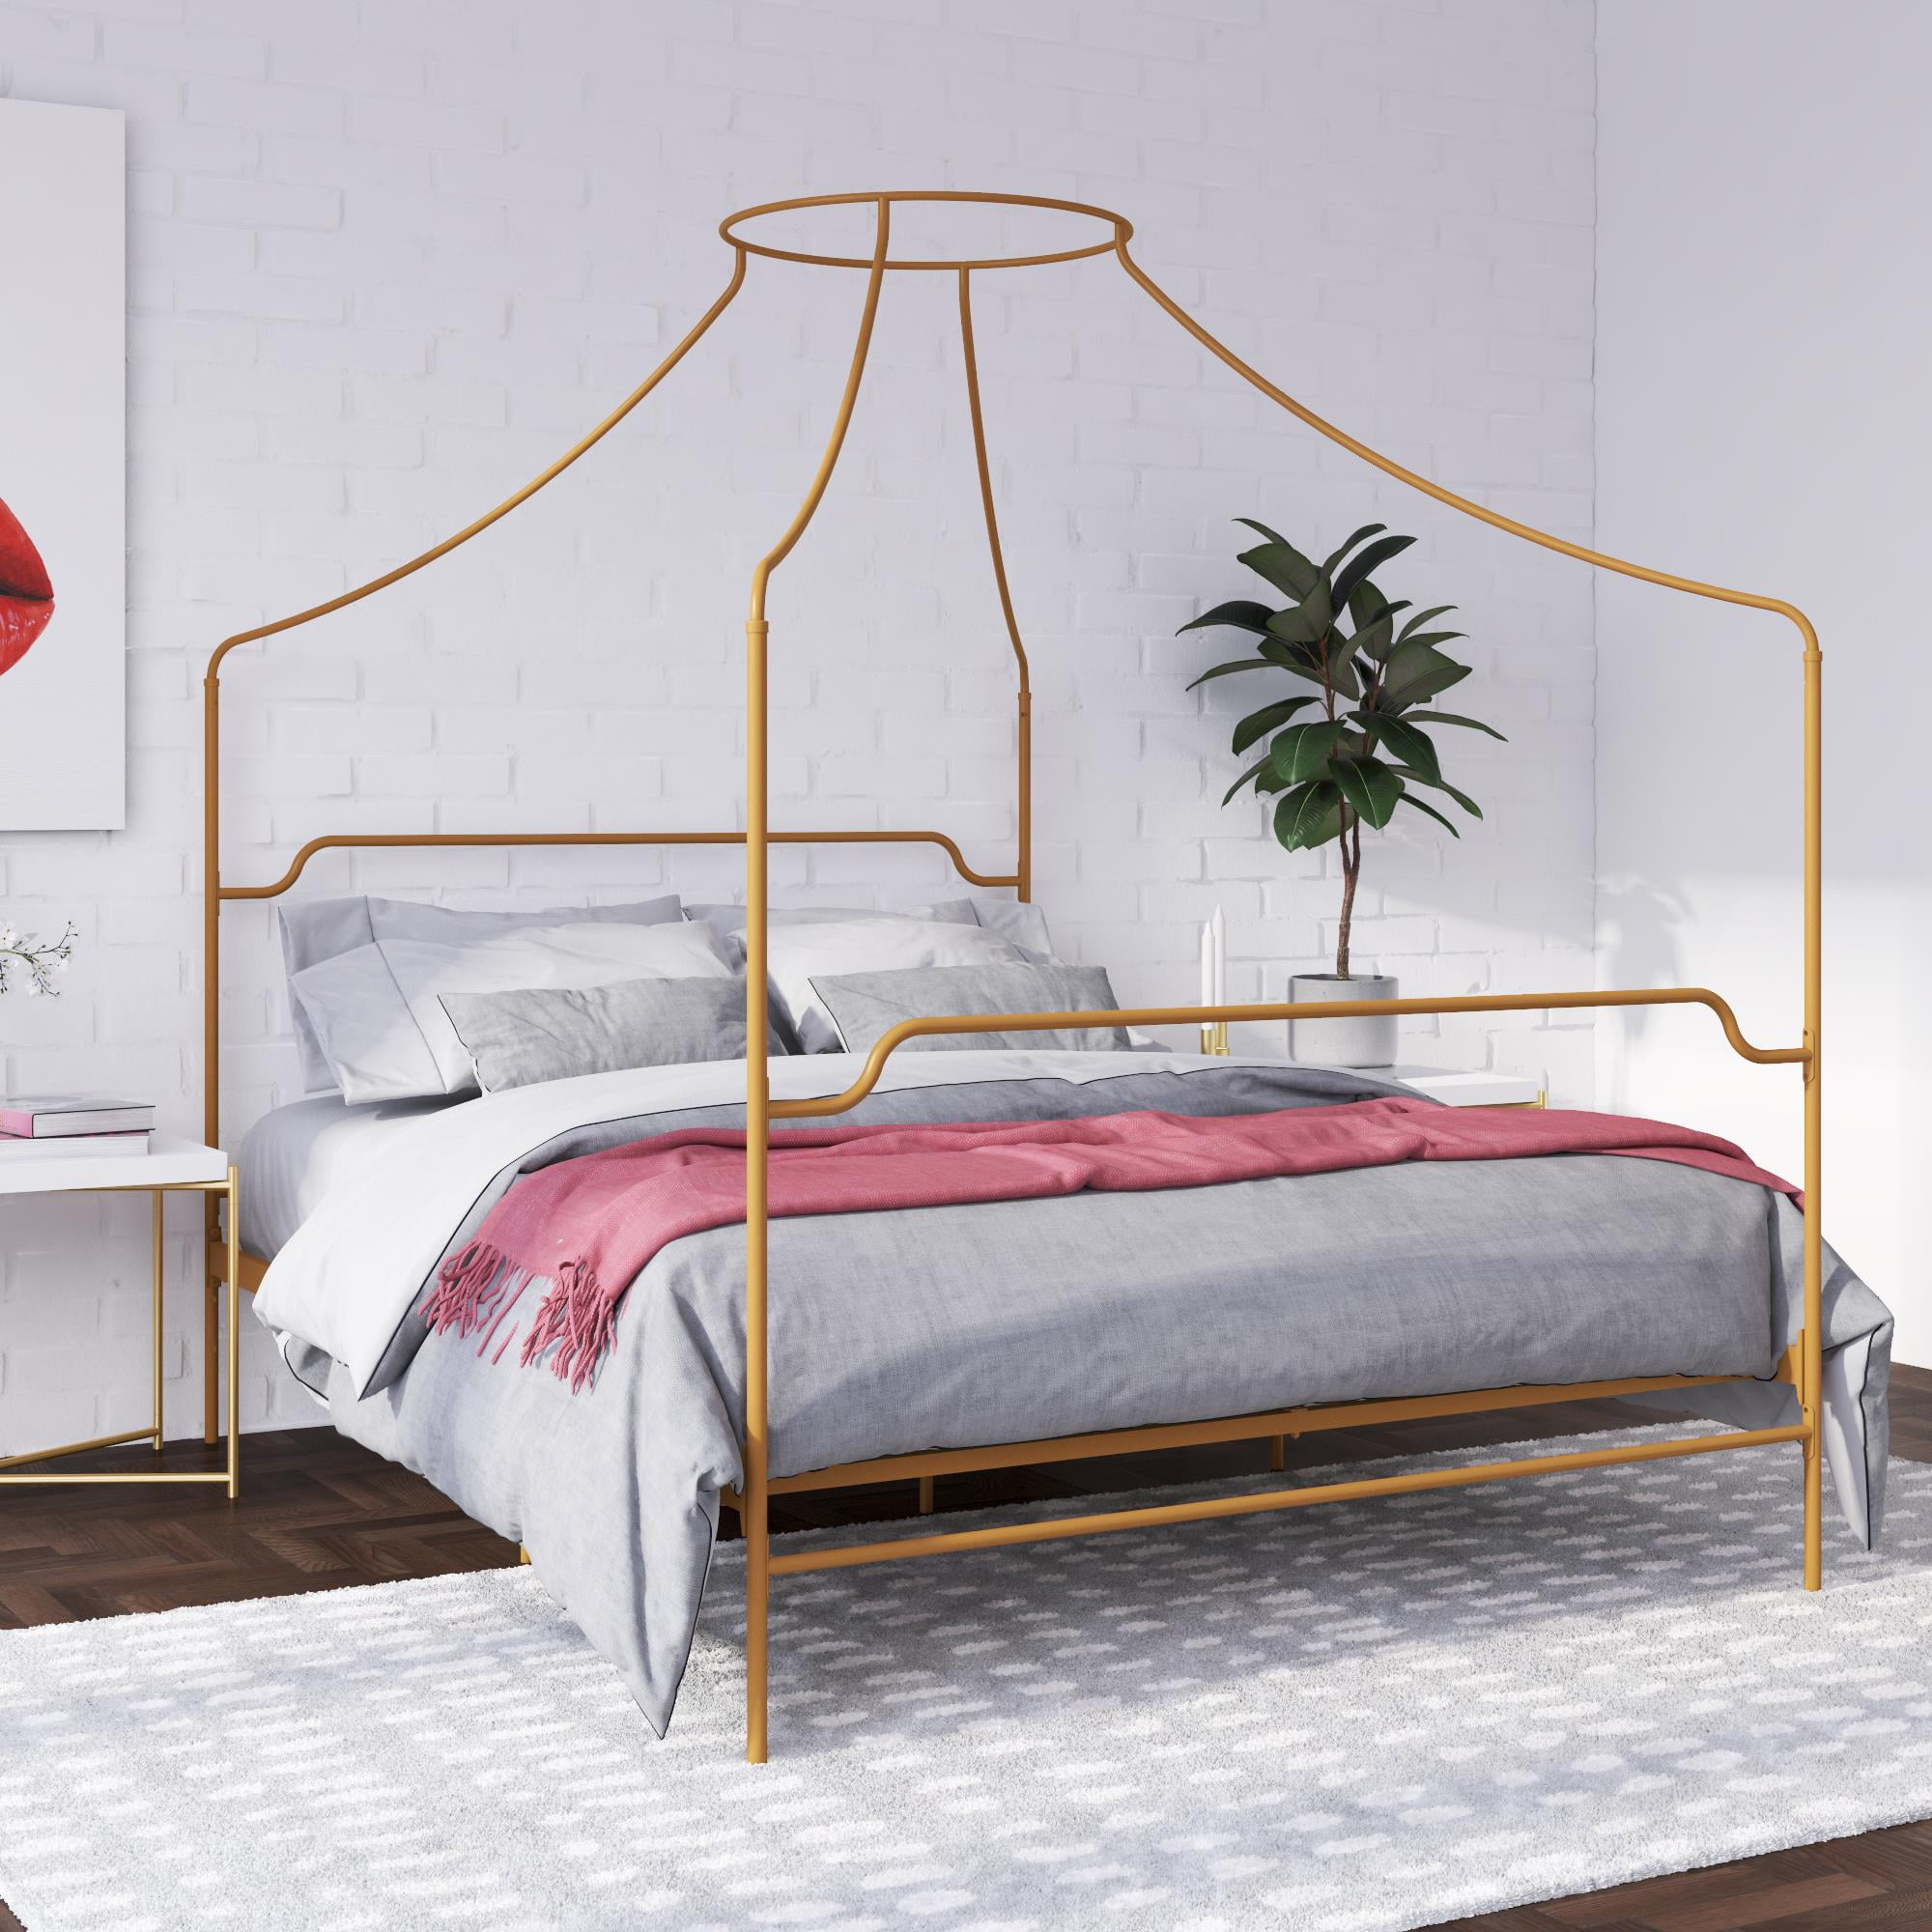 Metal Bed Frame Queen The Perks Of Choosing Queen Metal Bed Frame We Decided To Try This